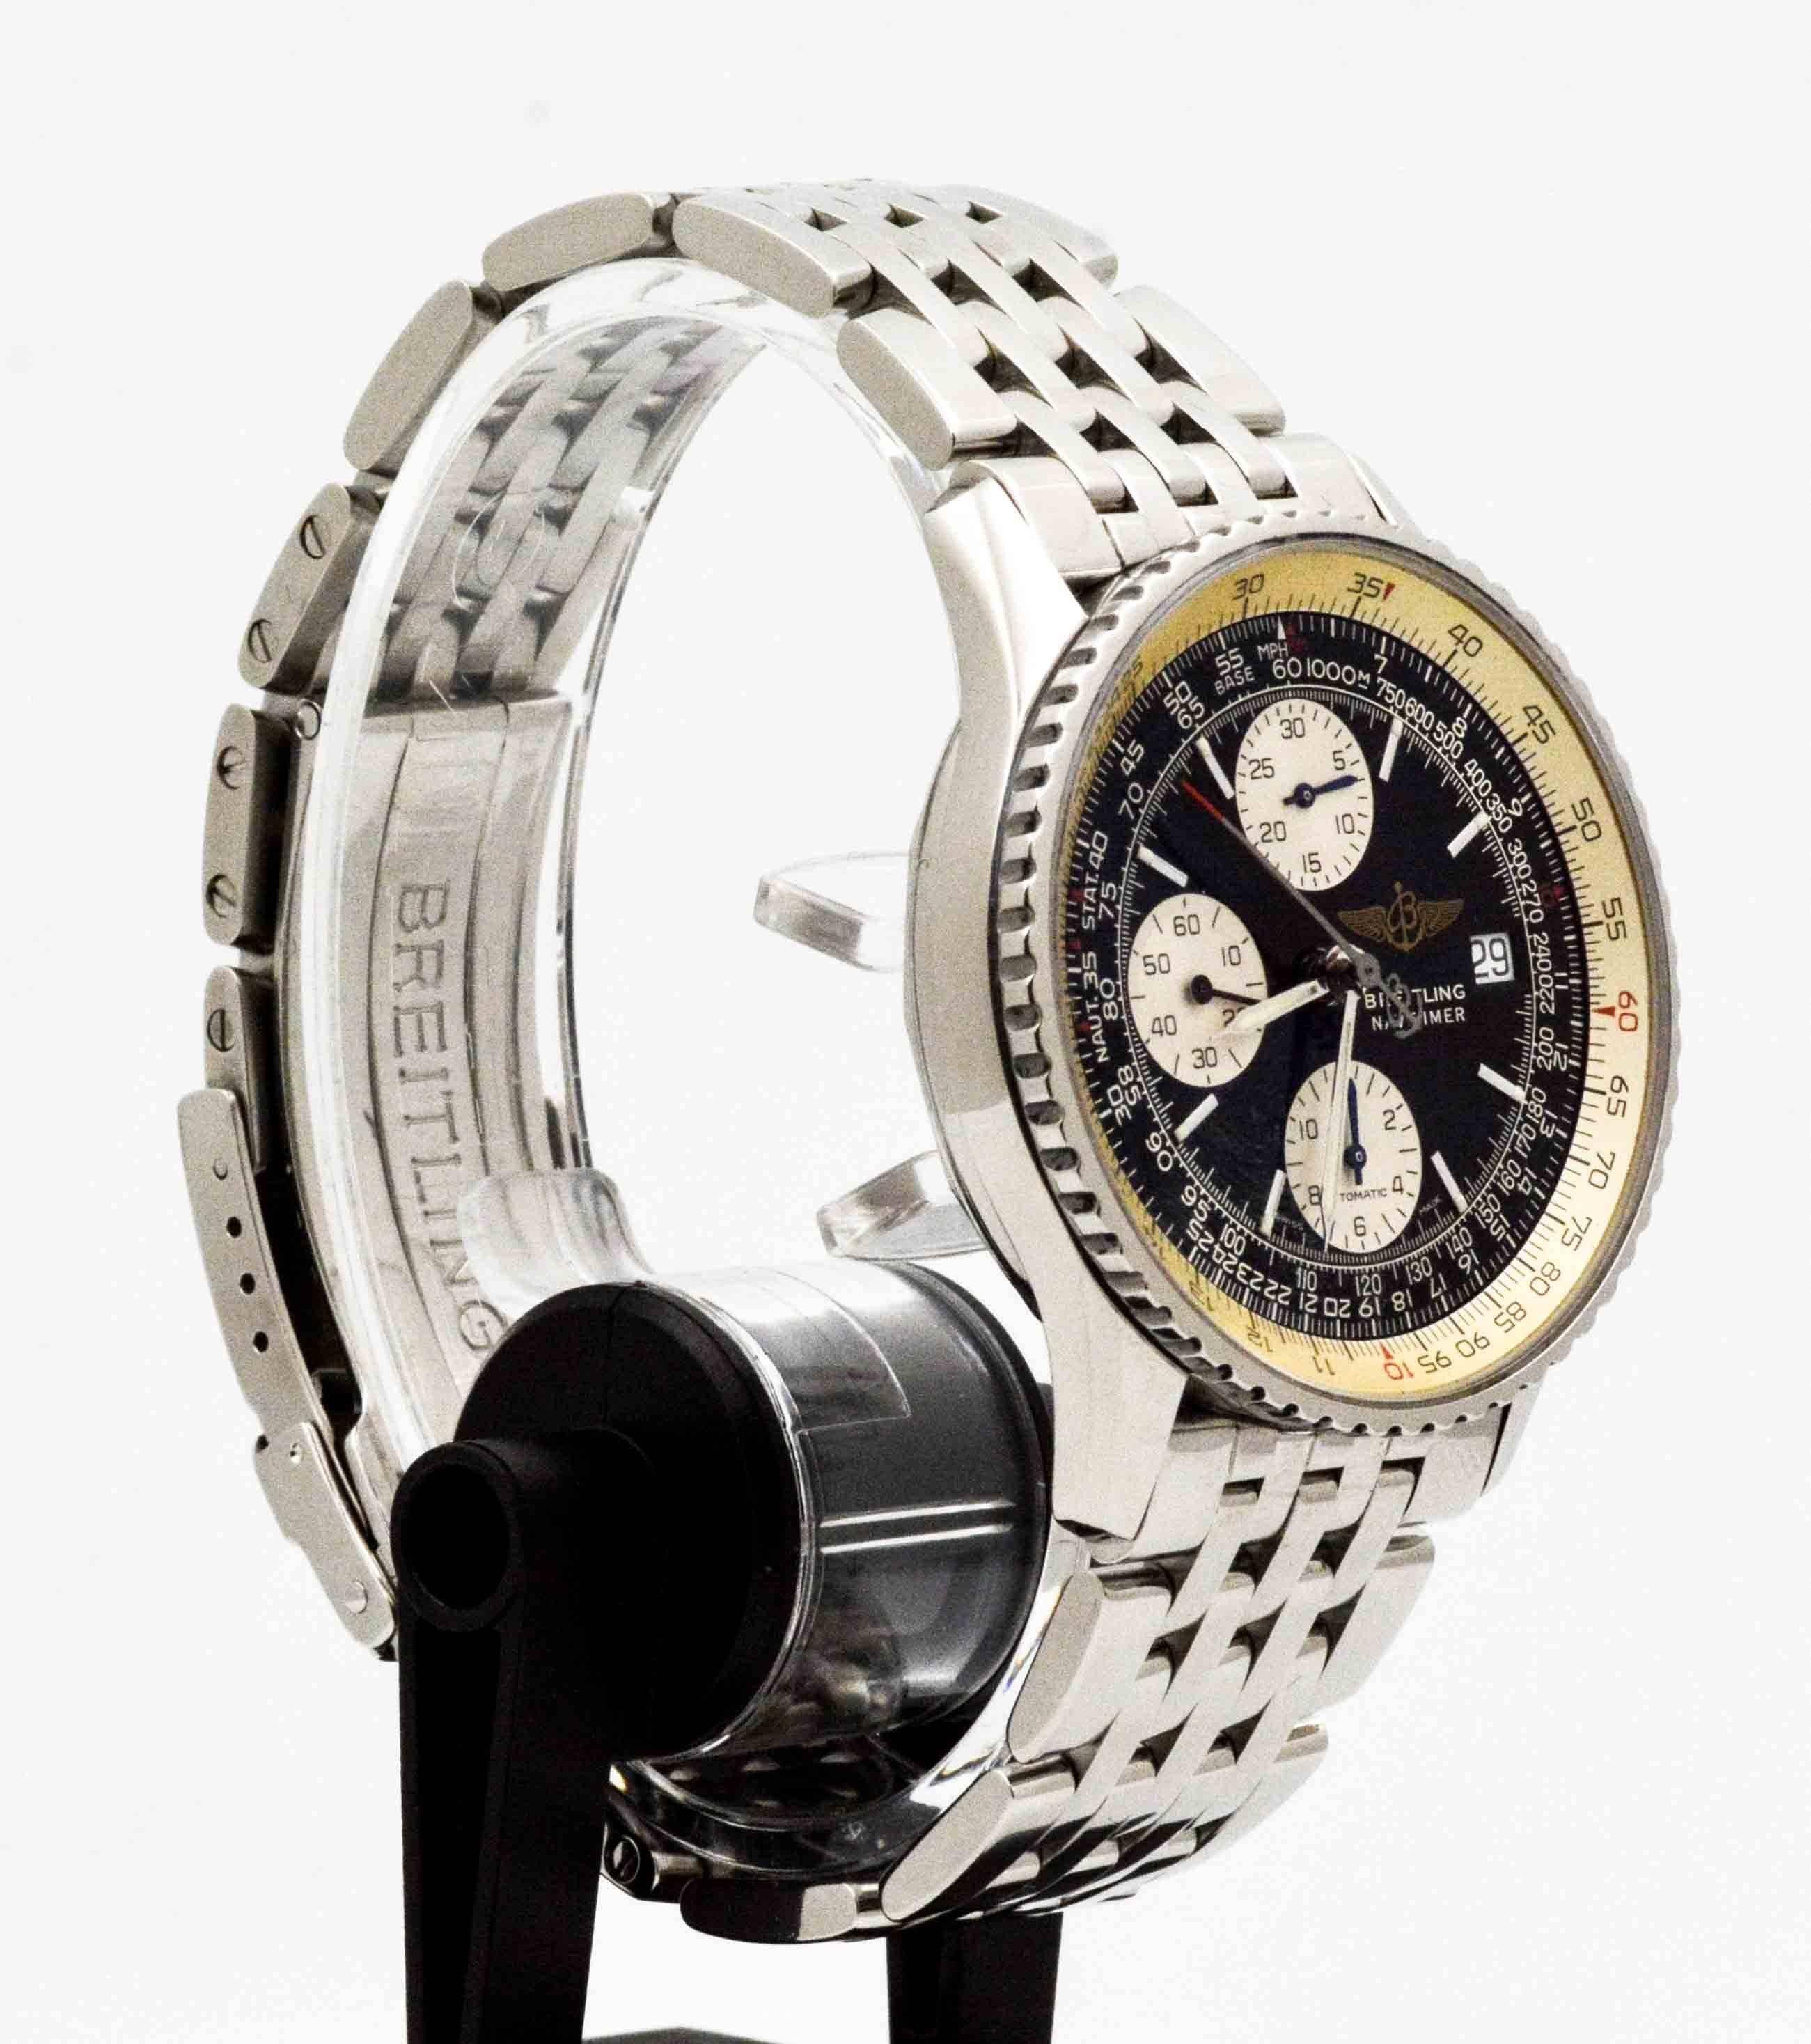 The Breitling Navitimer World travel watch features an extremely practical and easily readable dual timezone system. The selfwinding chronograph movement is protected by a 42 mm stainless steel case. The Breitling Navitimer has a black dial with 3